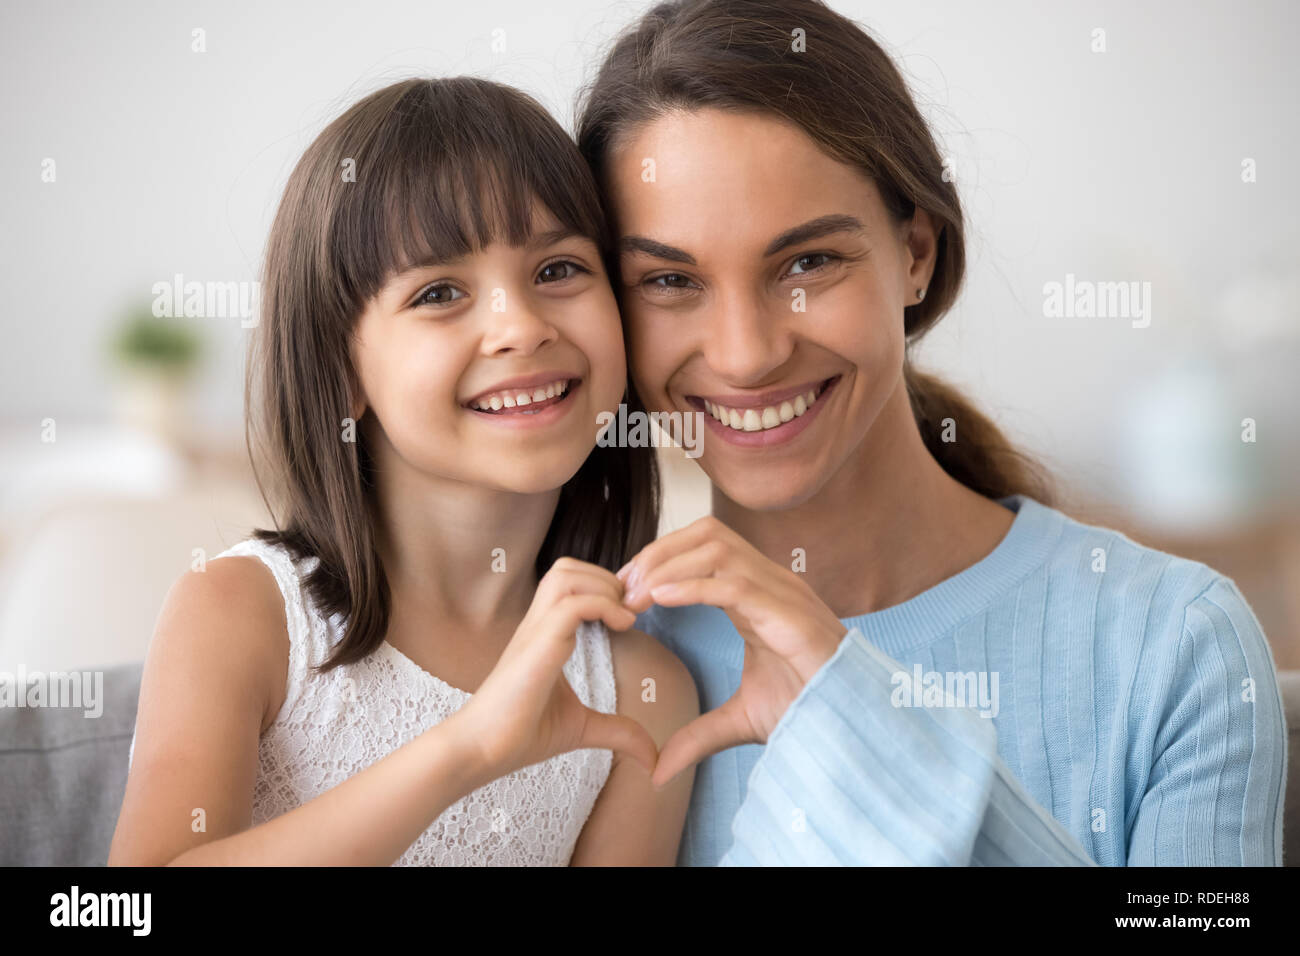 Cute daughter and happy mother join hands in heart shape Stock Photo